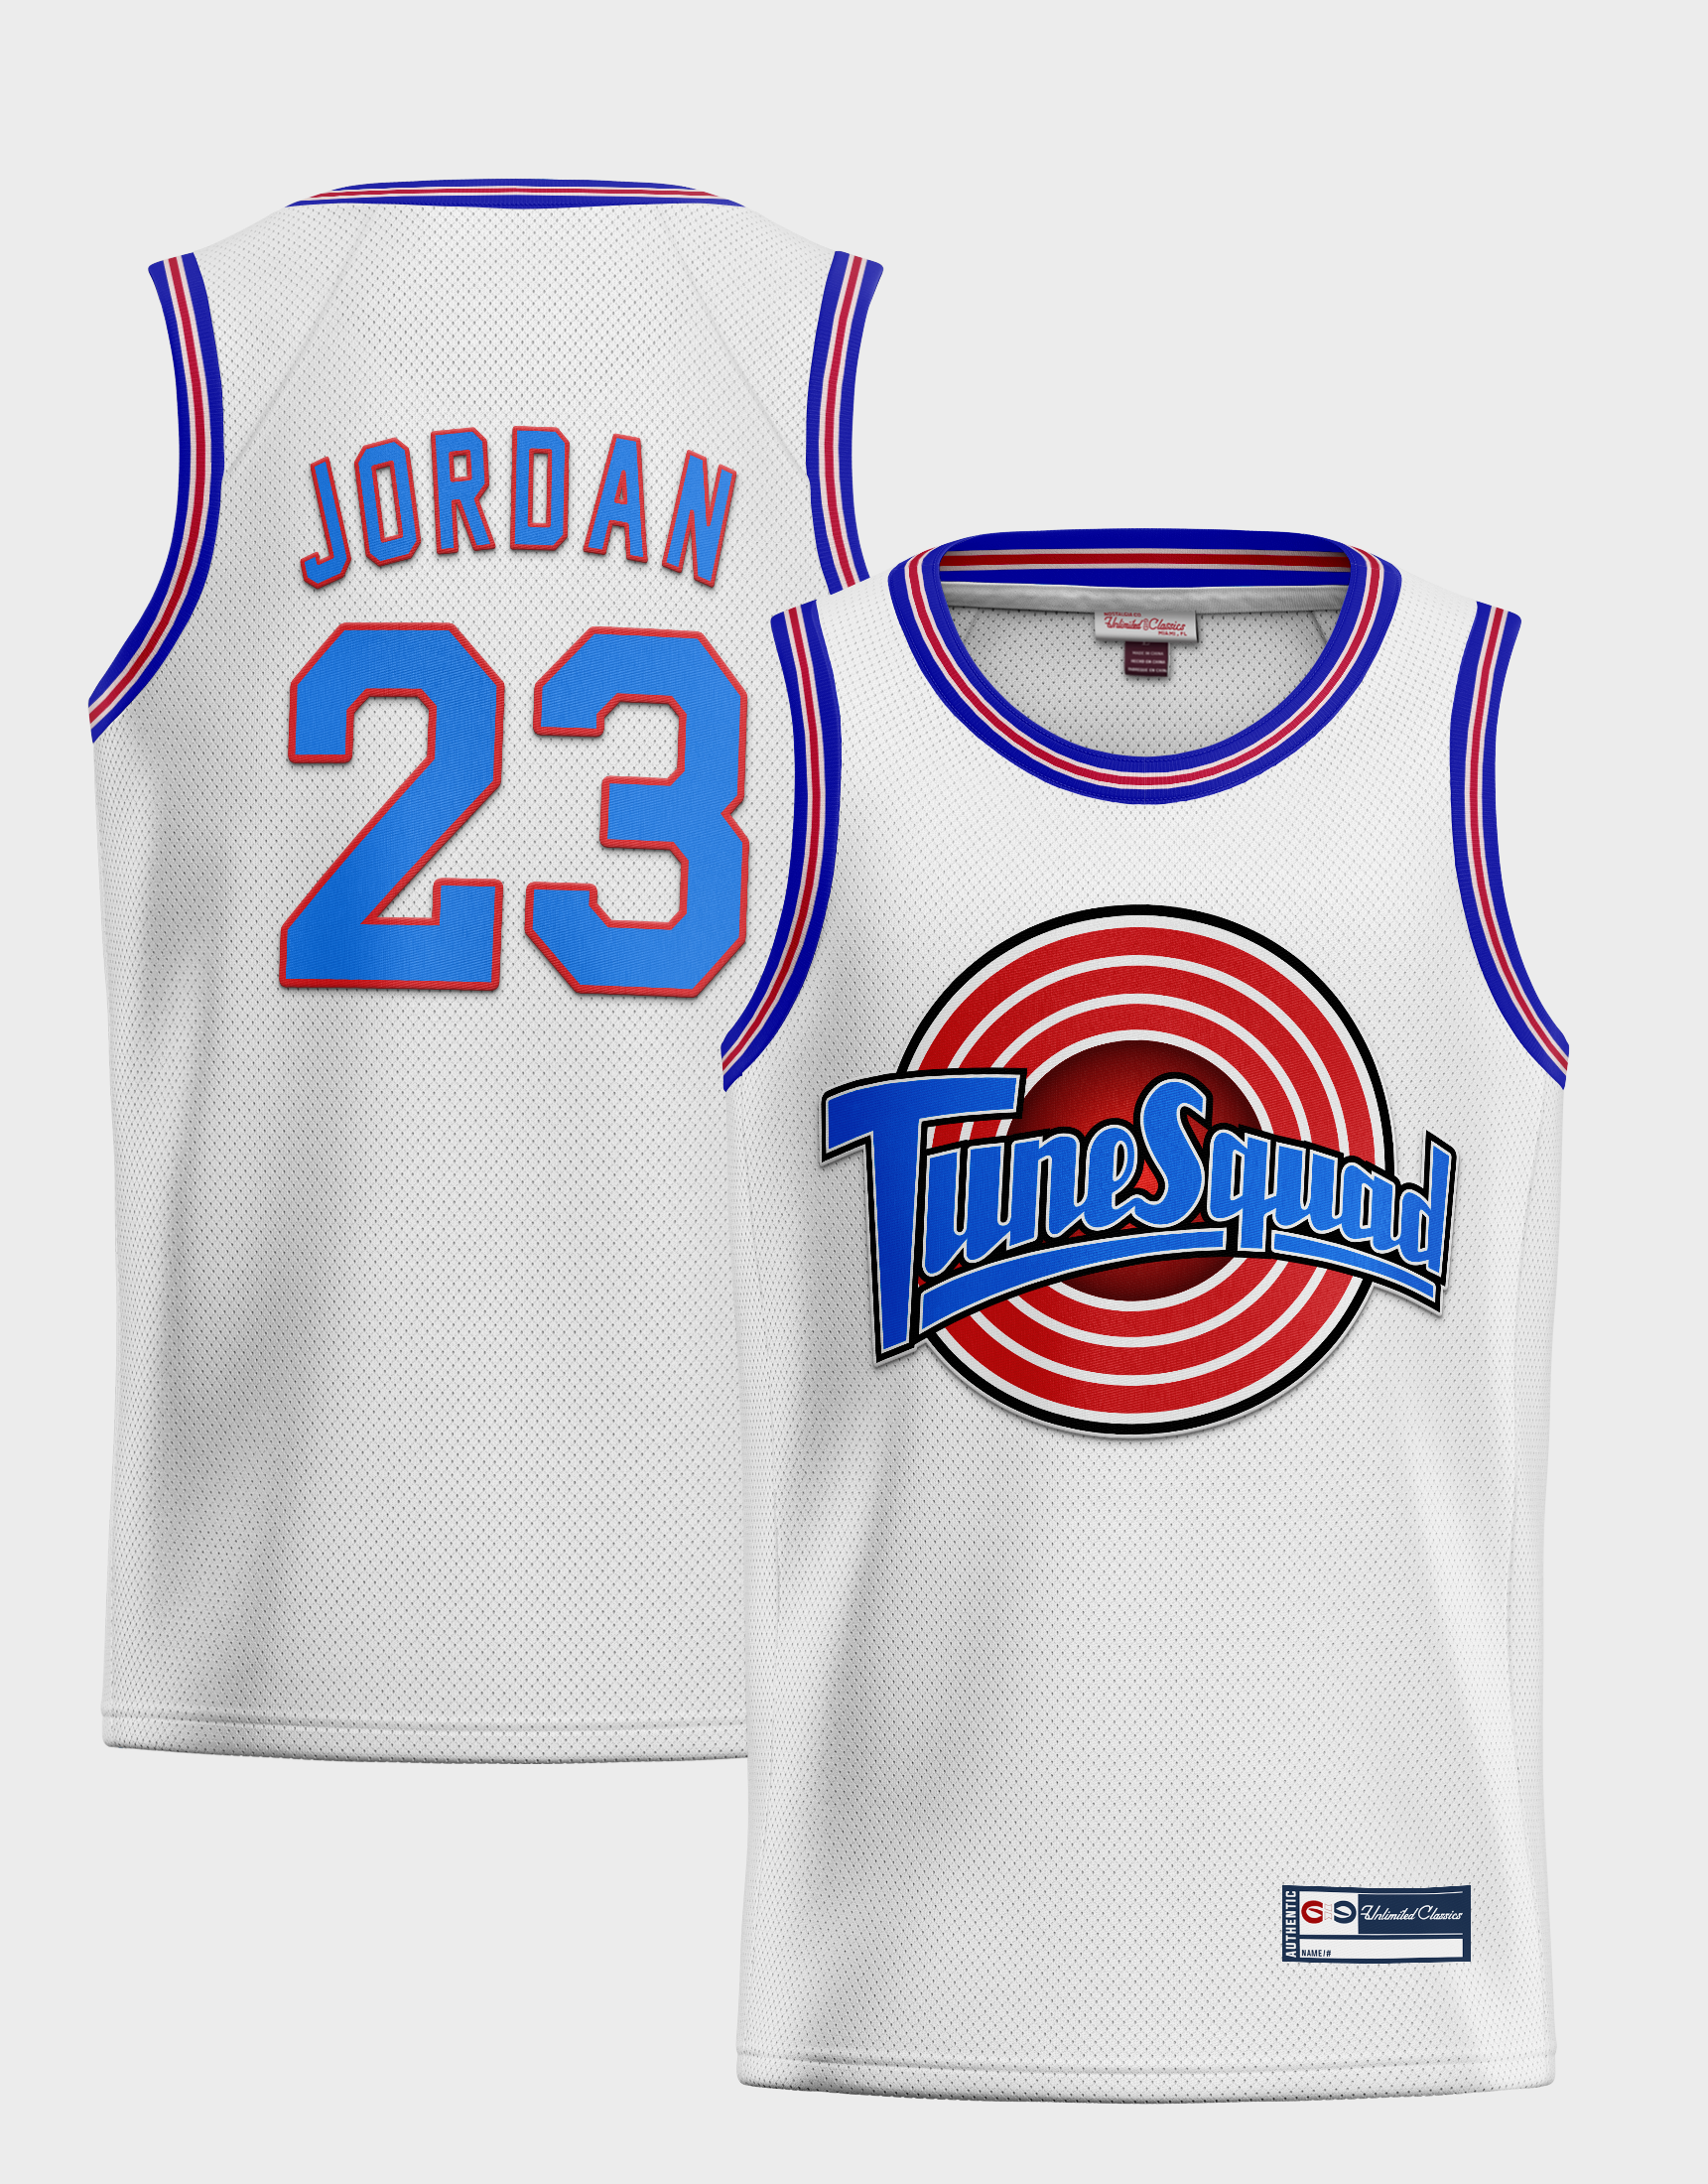 The jersey basketball Tune Squad worn by Michael Jordan in Space